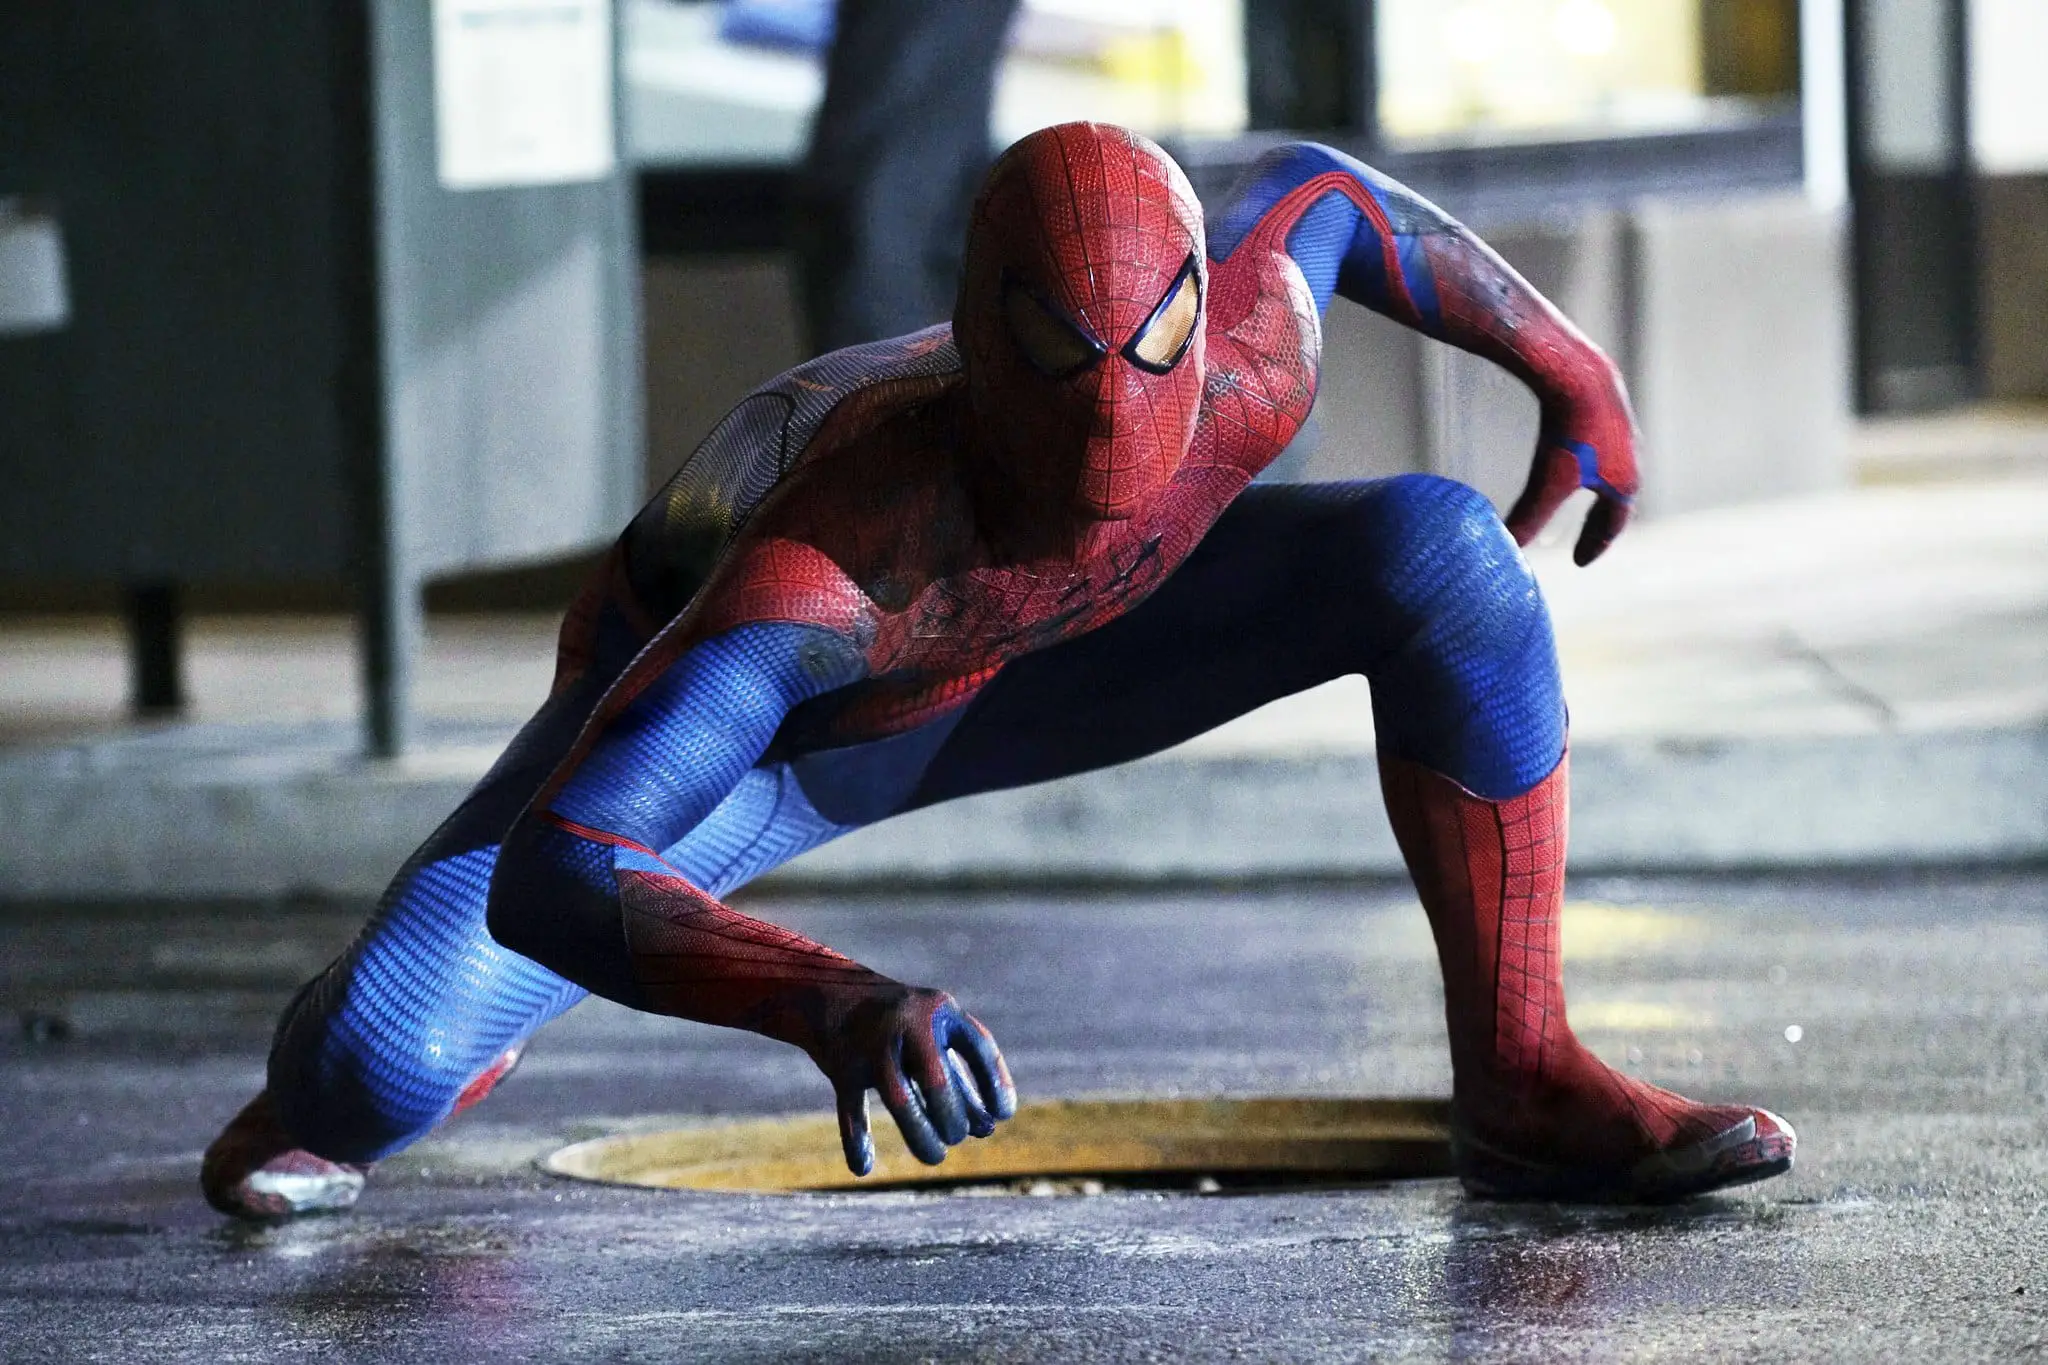 25 Famous Spiderman Quotes From Movies & Comics